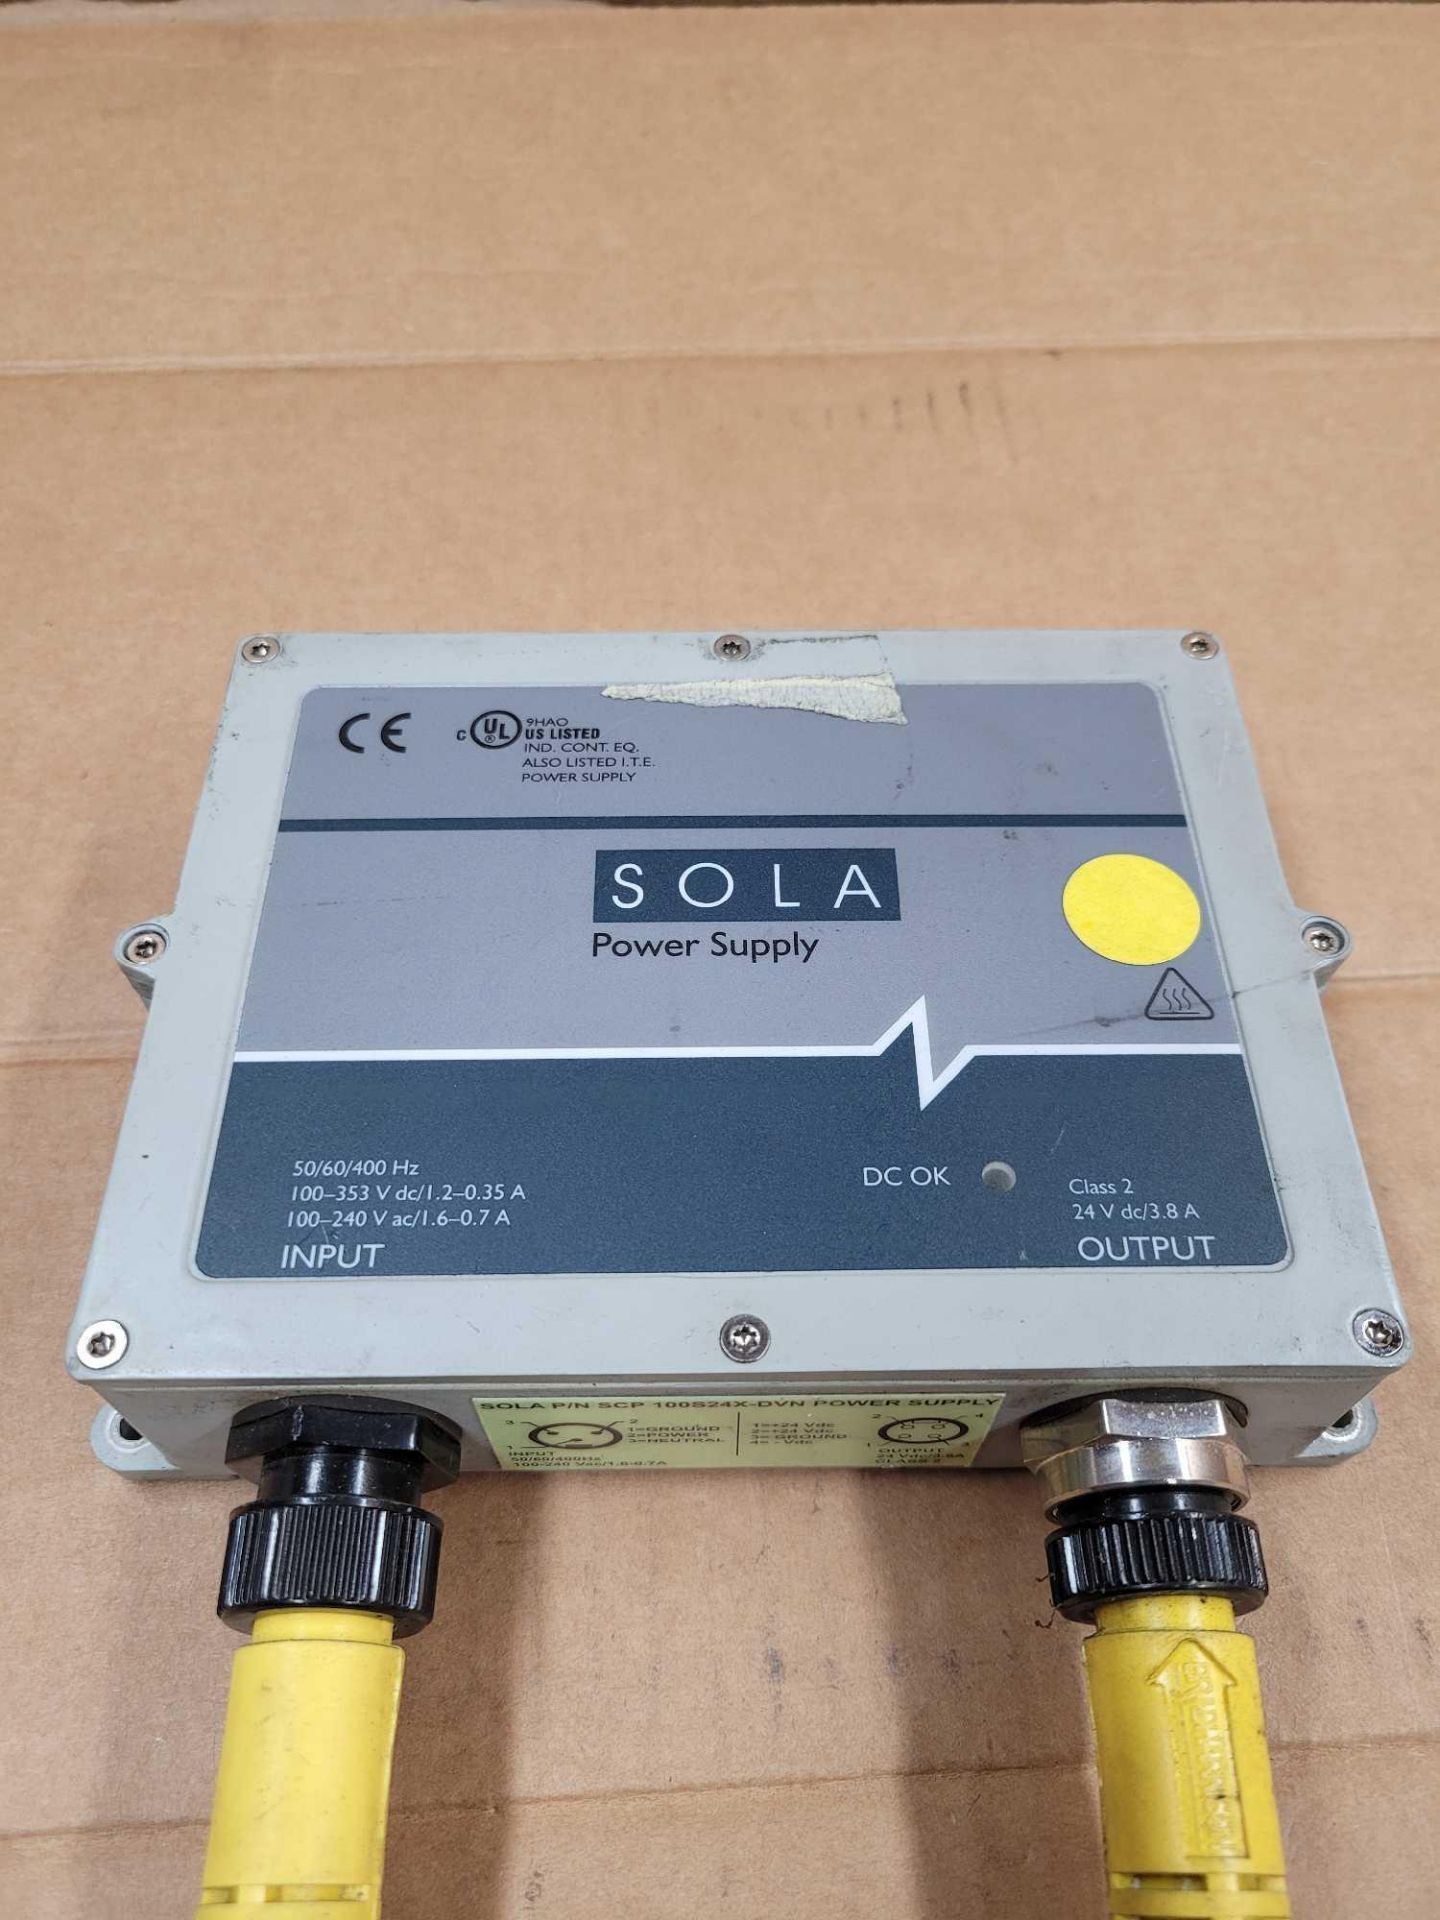 LOT OF 4 SOLA SCP 100S24X-DVN / Power Supply  /  Lot Weight: 12.6 lbs - Image 2 of 6